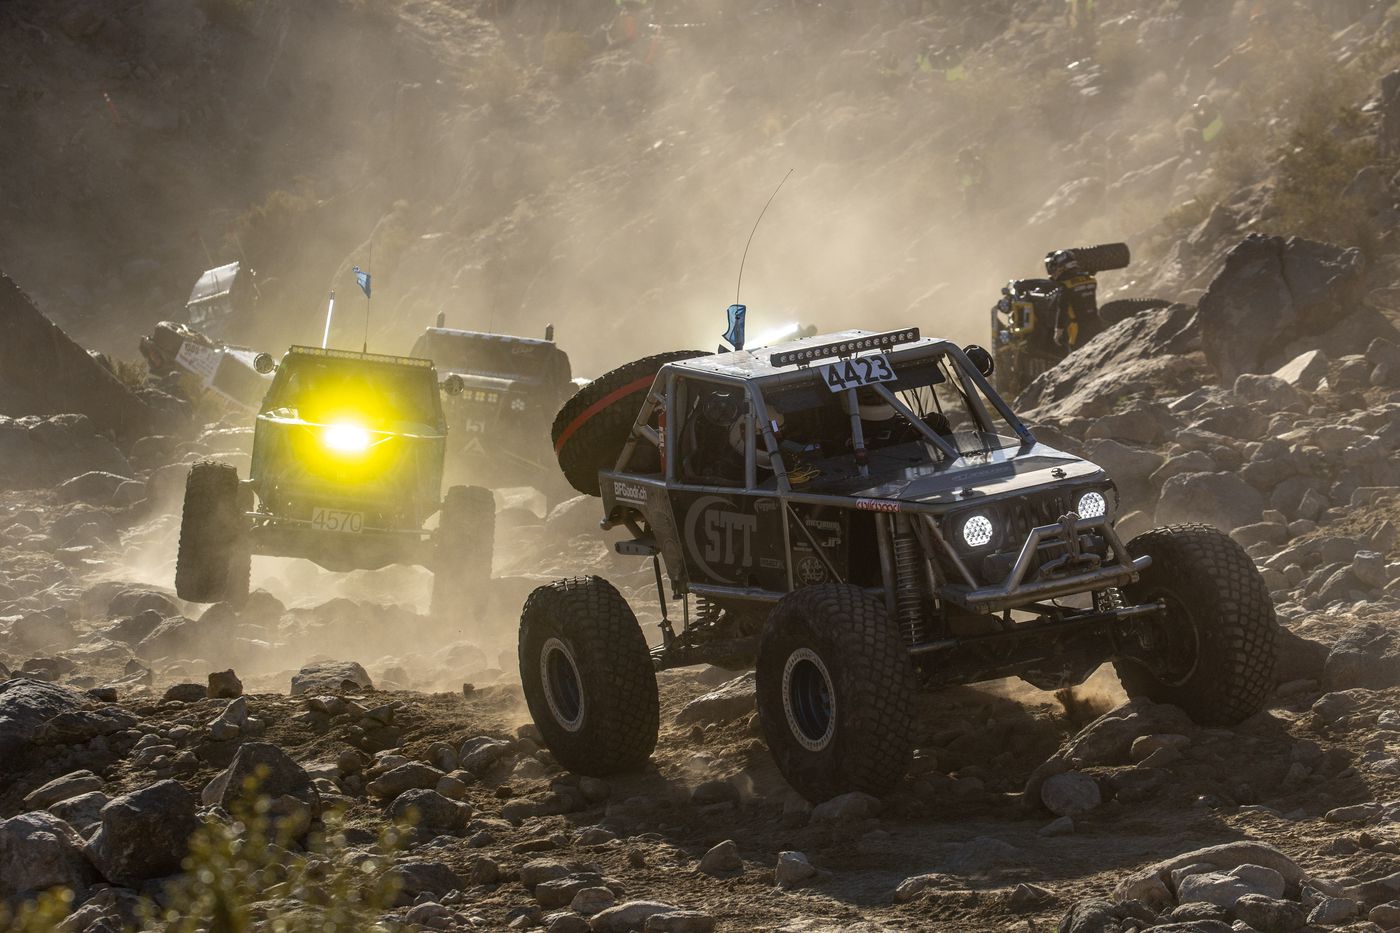 ‘burning man for rednecks’: inside king of the hammers, the gnarliest off-road race of the year